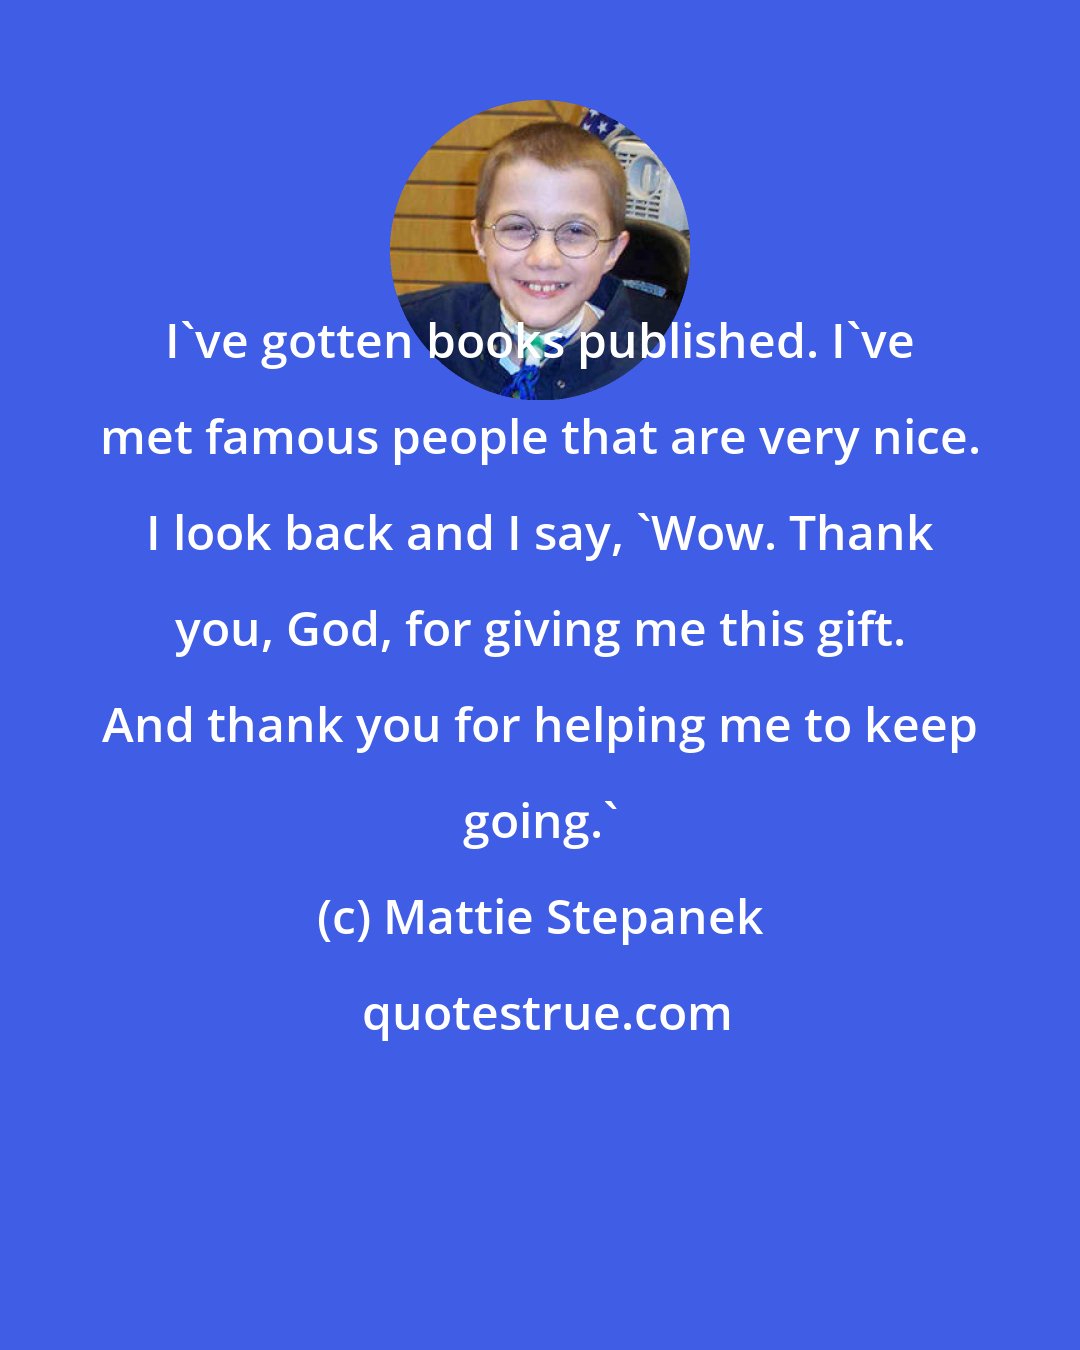 Mattie Stepanek: I've gotten books published. I've met famous people that are very nice. I look back and I say, 'Wow. Thank you, God, for giving me this gift. And thank you for helping me to keep going.'